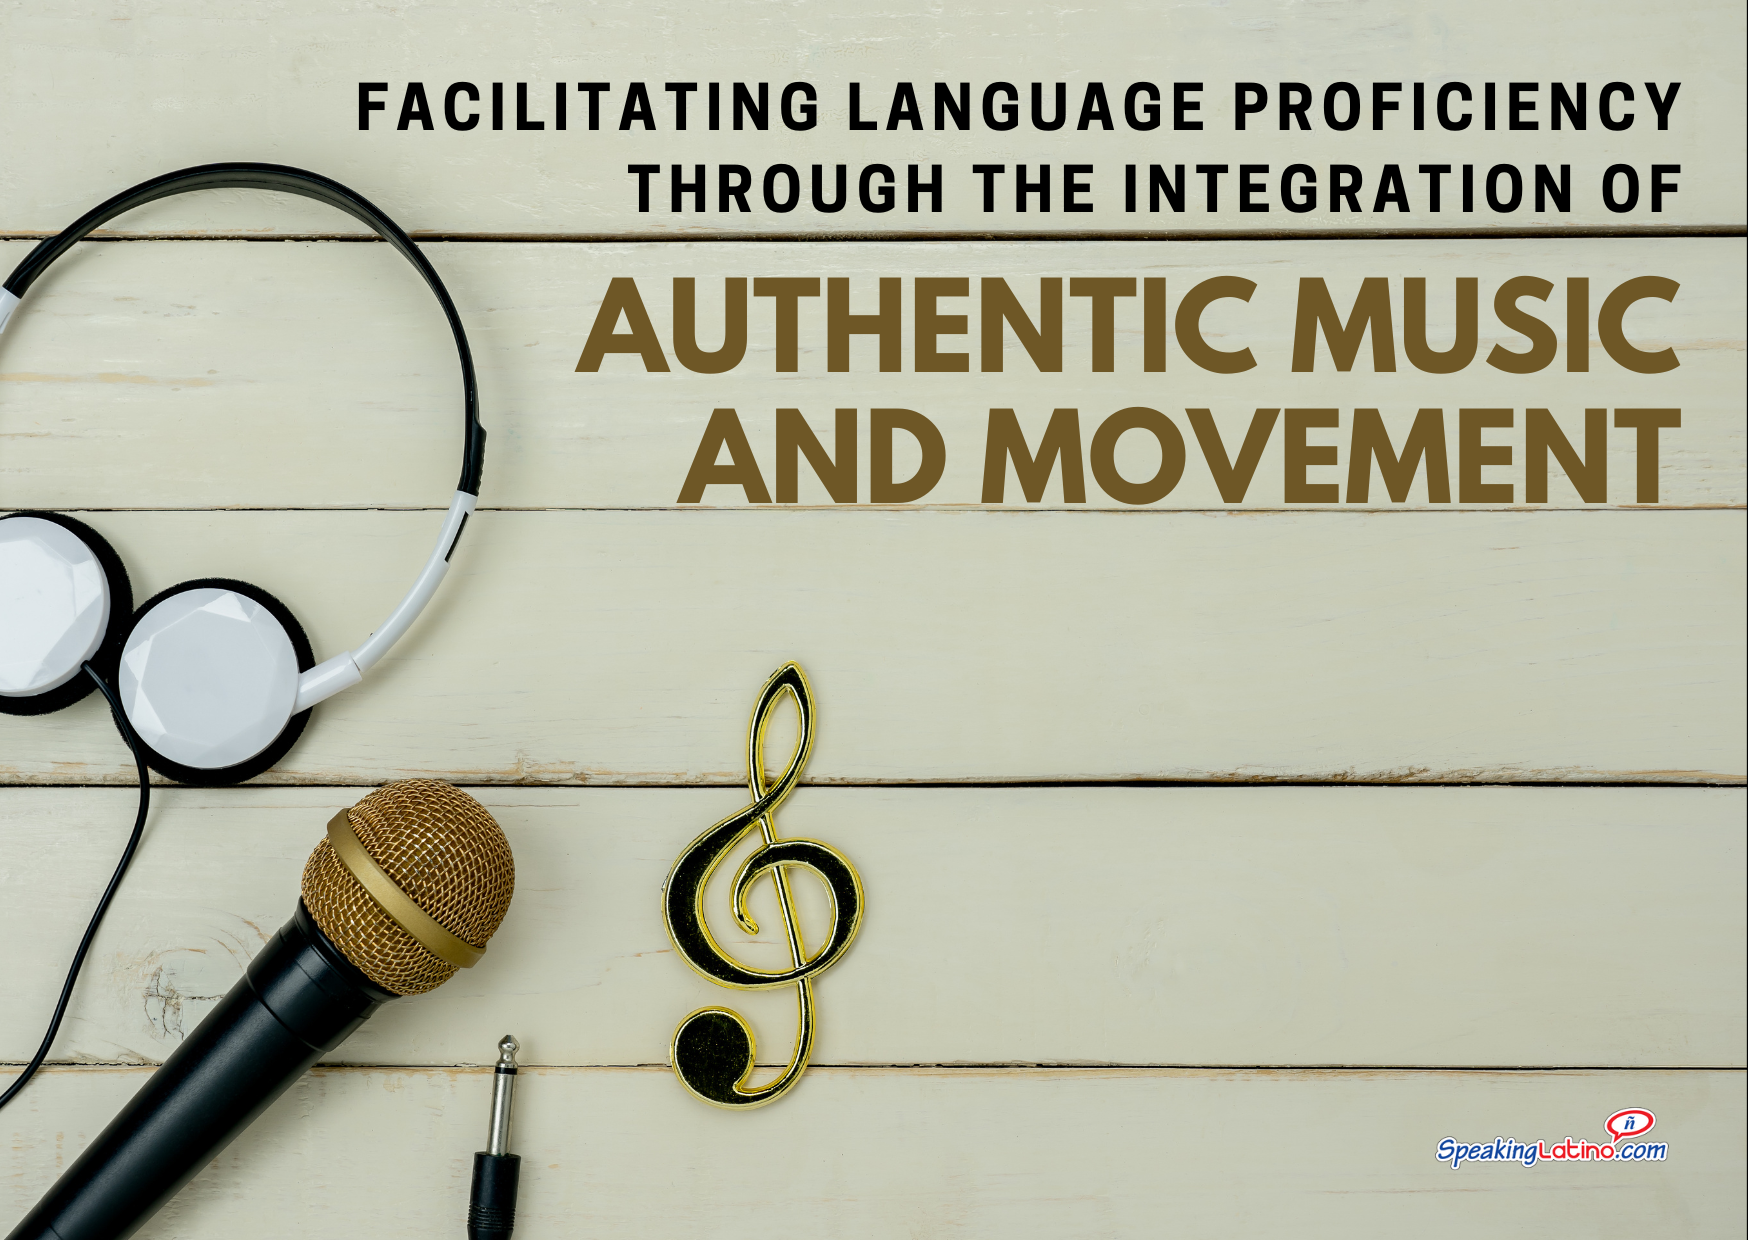 Facilitating Language Proficiency through the Integration of Authentic Music and Movement Facilitating Language Proficiency through the